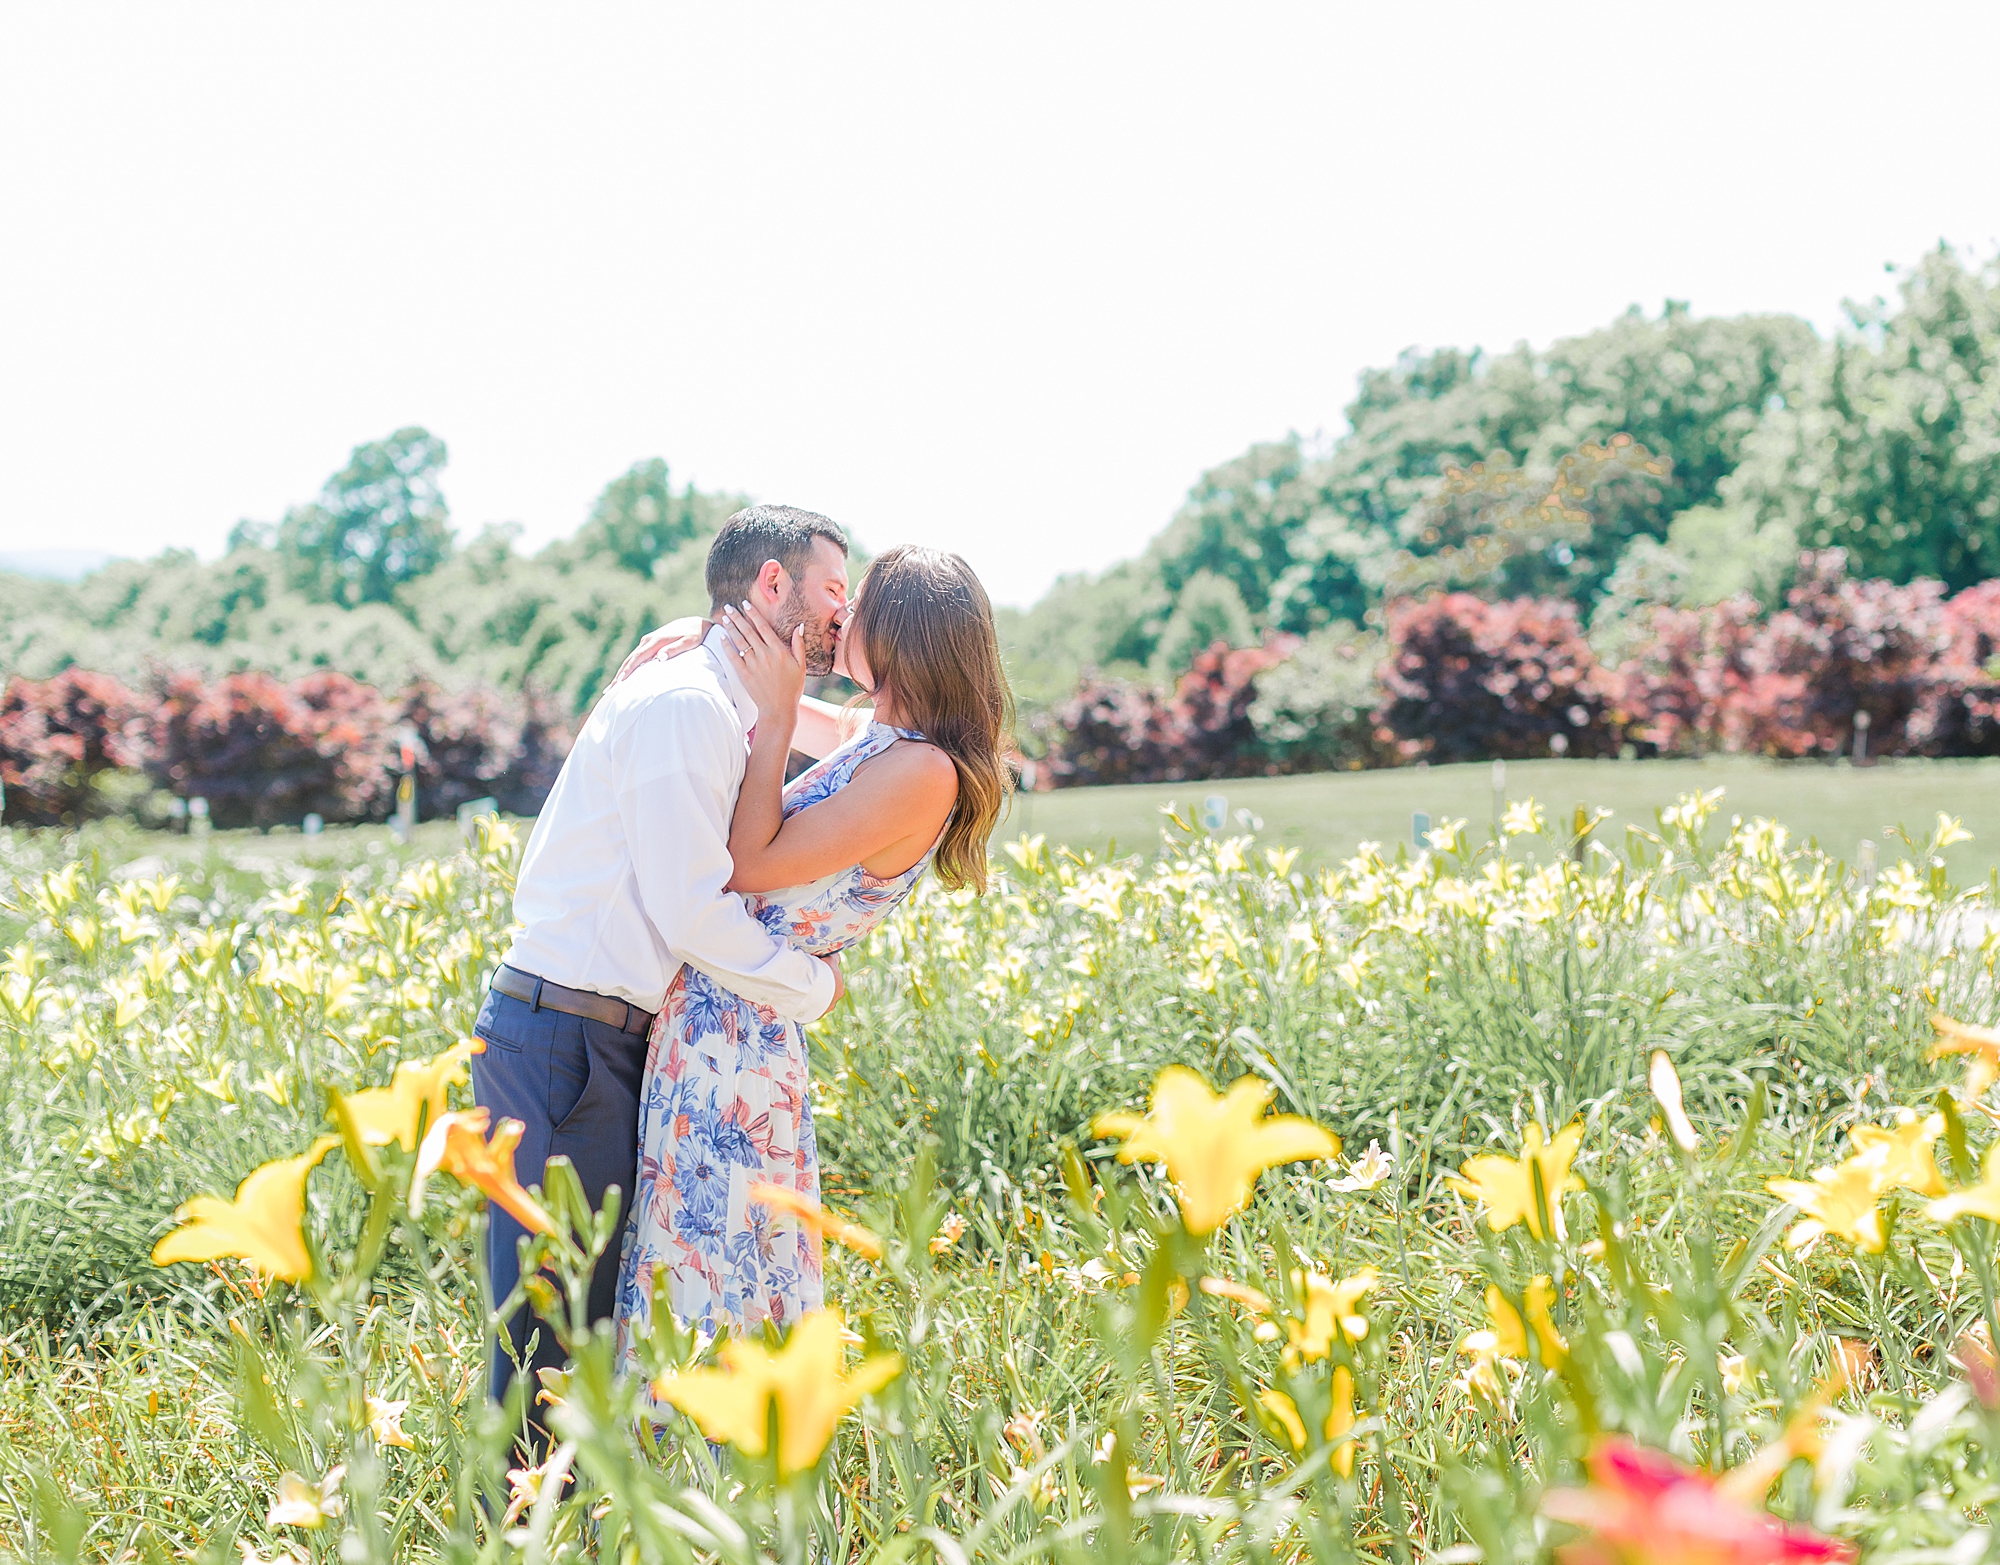 Couple kissing in field of tulips.